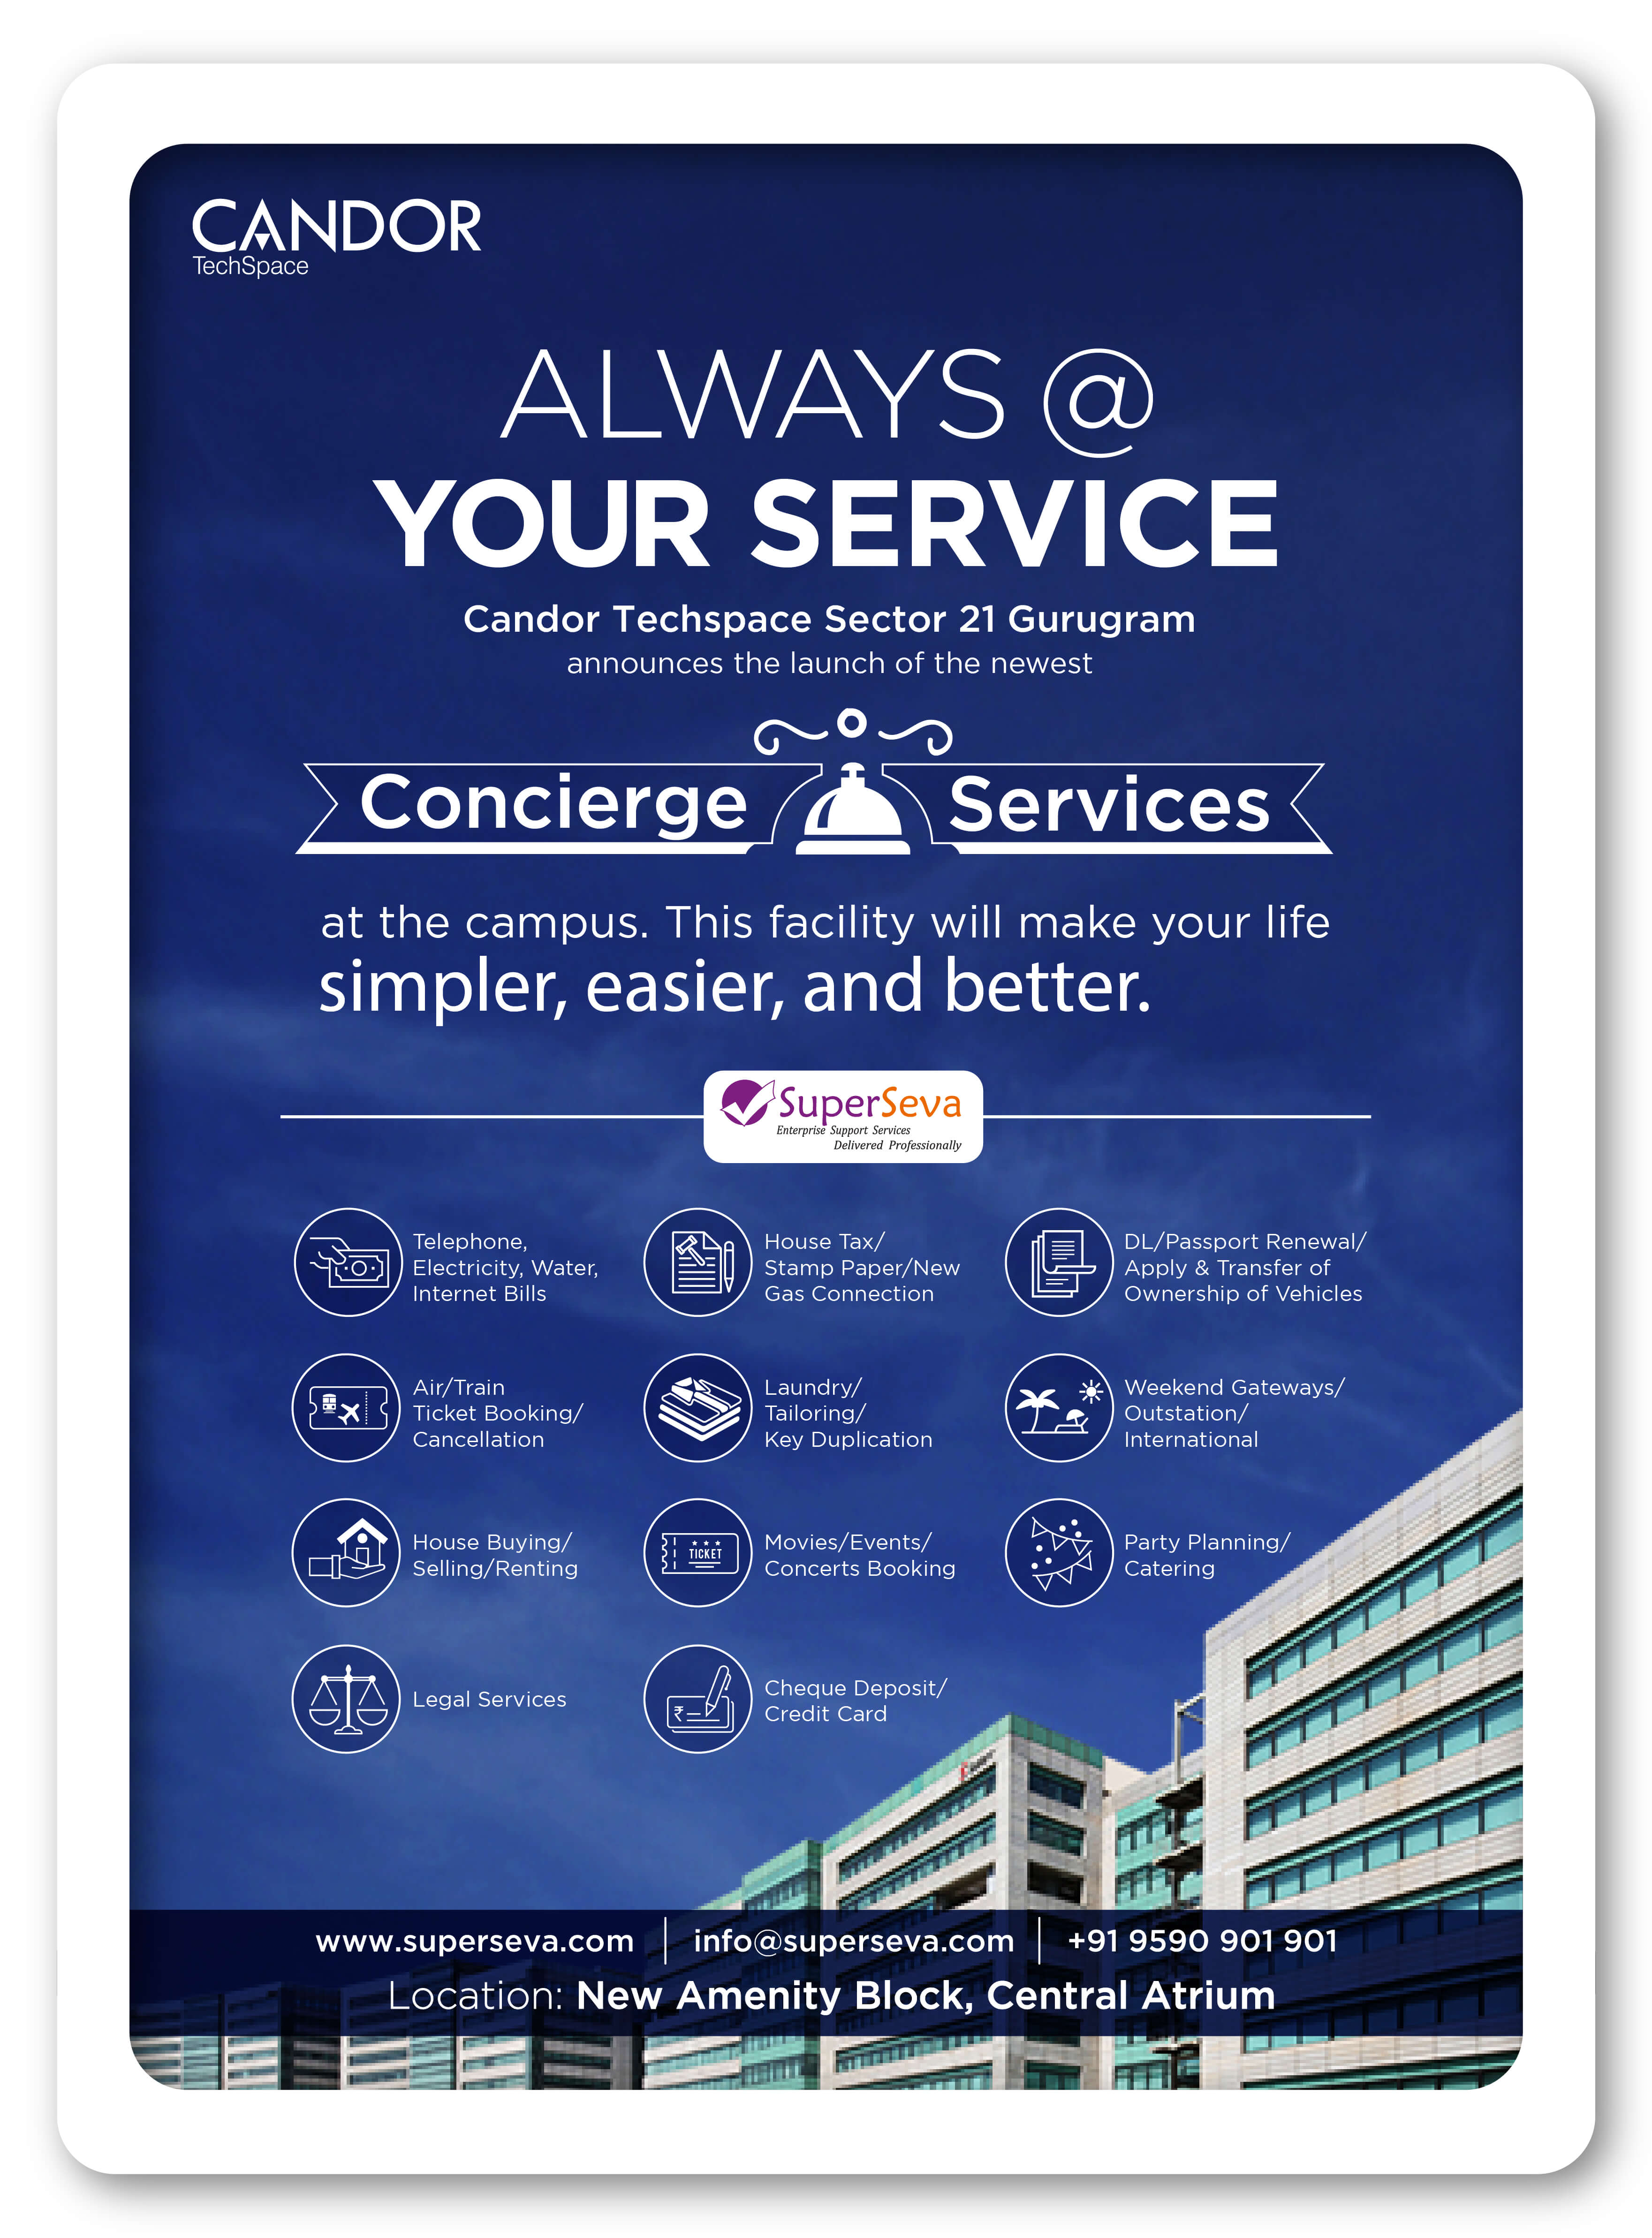 Concierge Services available at Candor TechSpace, Sector-21 Gurugram